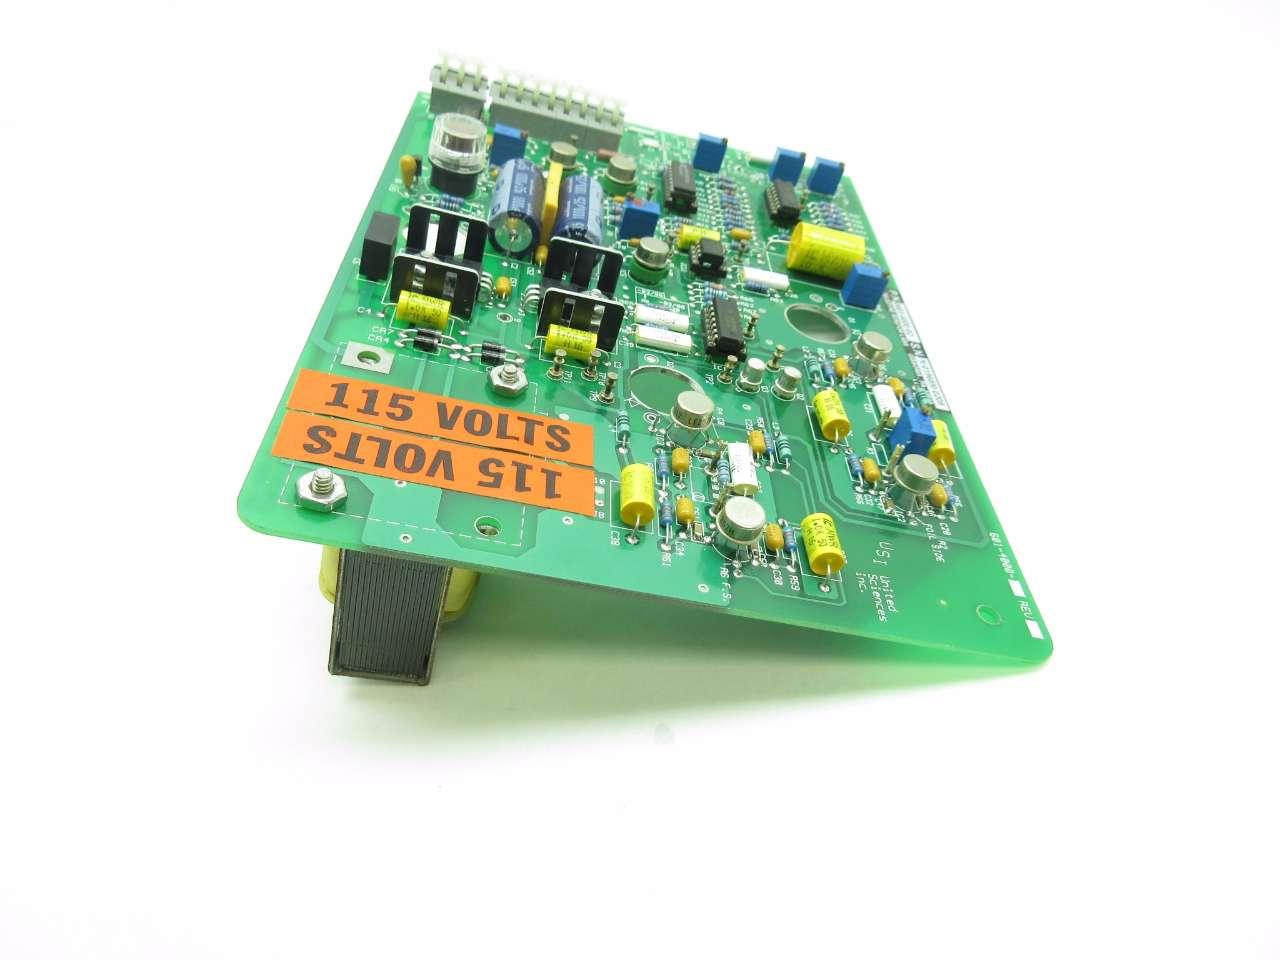 Details about   TELEDYNE 1010-0000-02 CARD PRINTED CIRCUIT REMOTE 